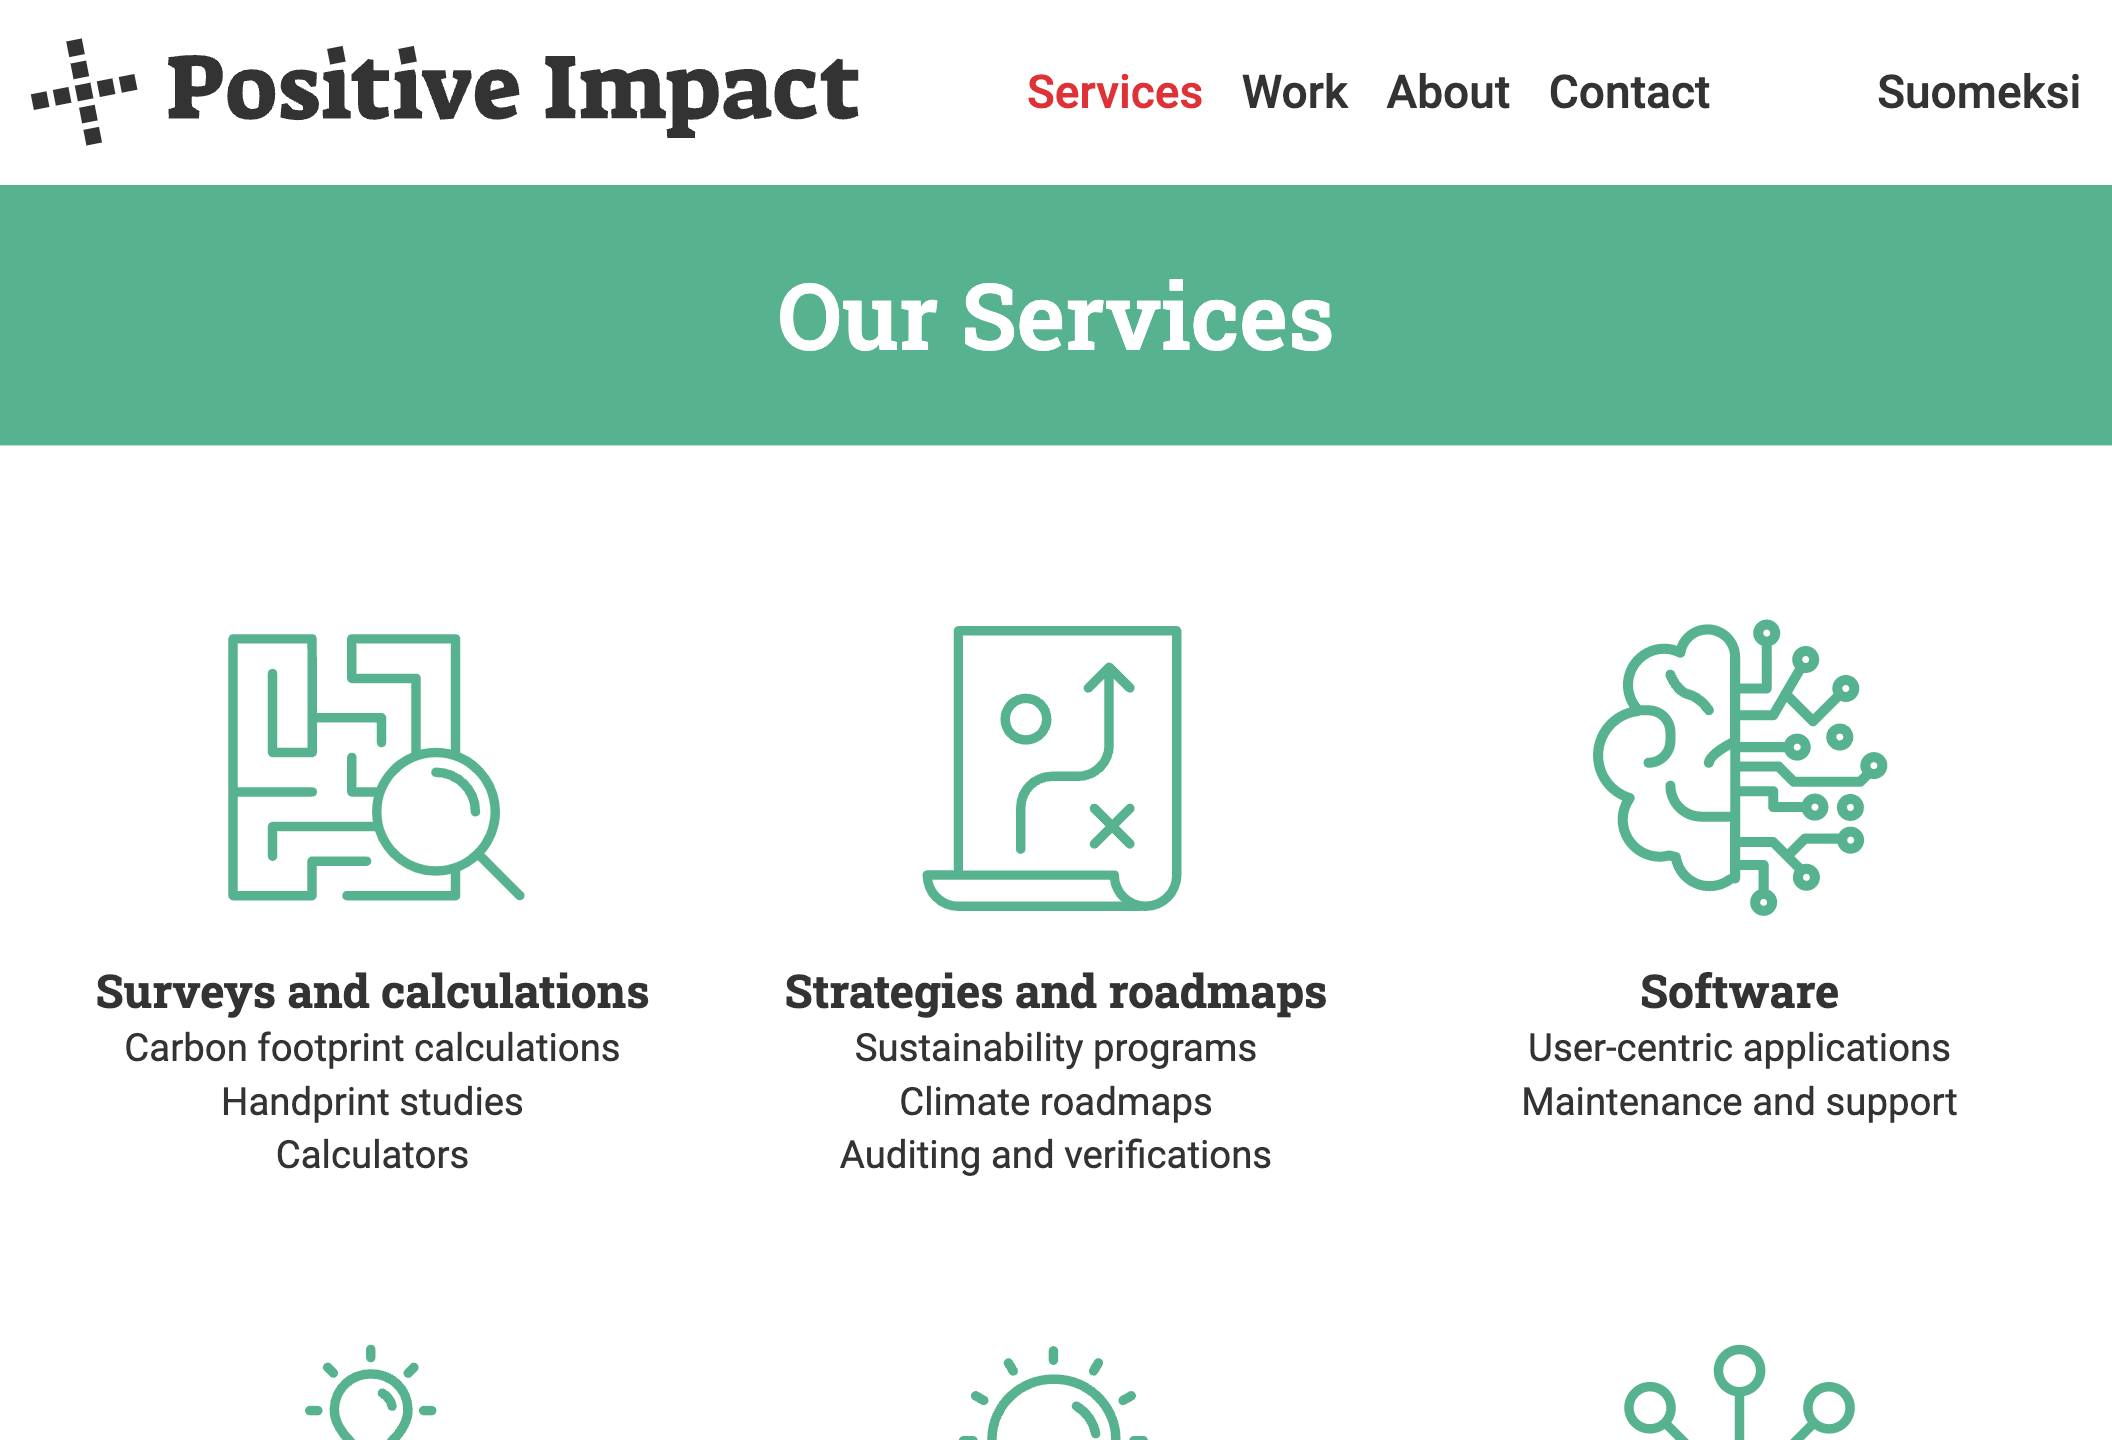 Screenshot of the Positive Impact application